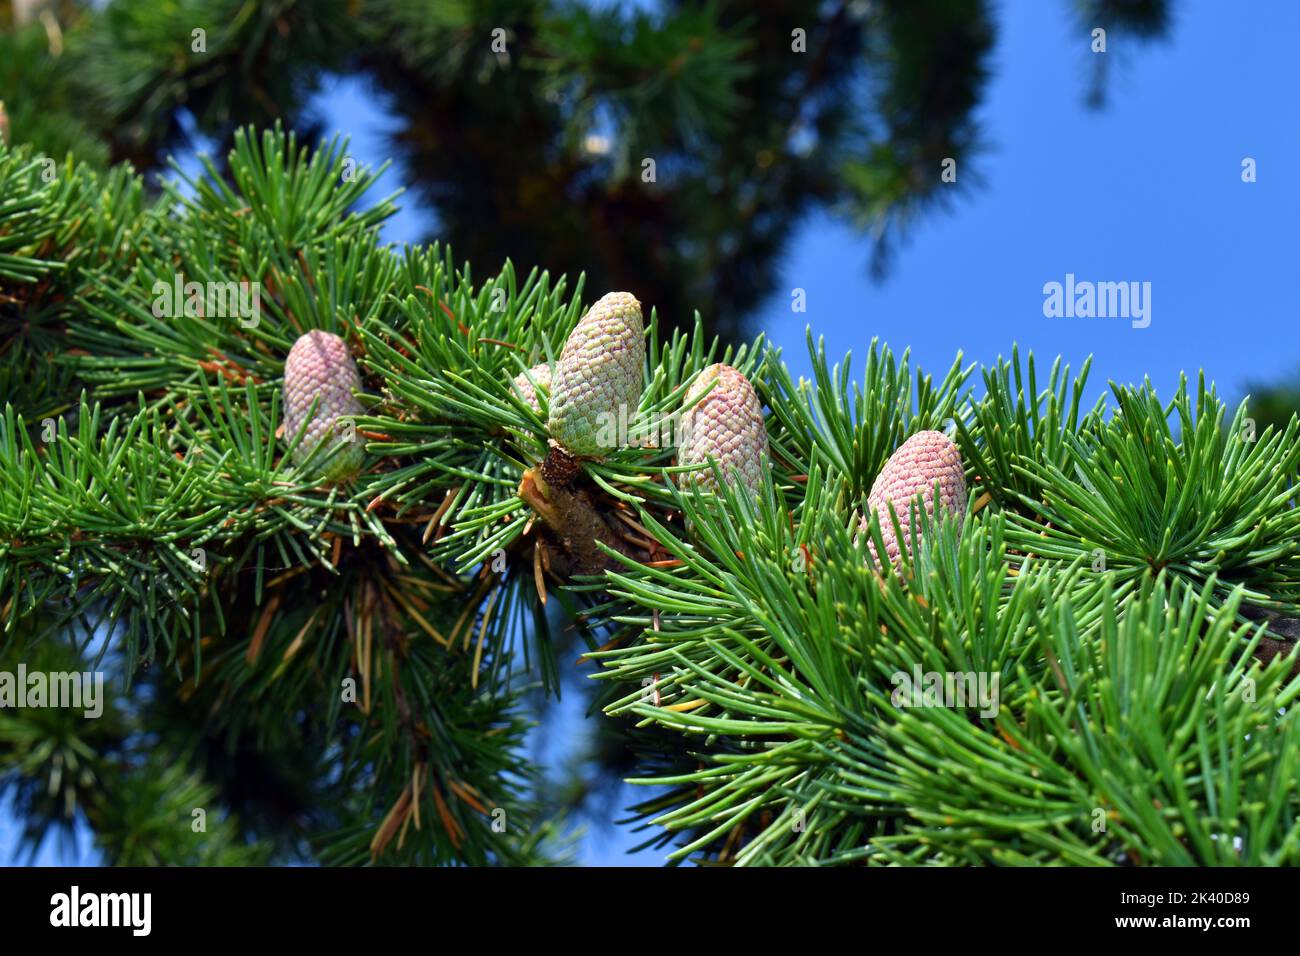 A cedar (Cedrus libani) showing its leaves and female cones. Arboretum of the University of the Basque Country. Leioa. Spain Stock Photo